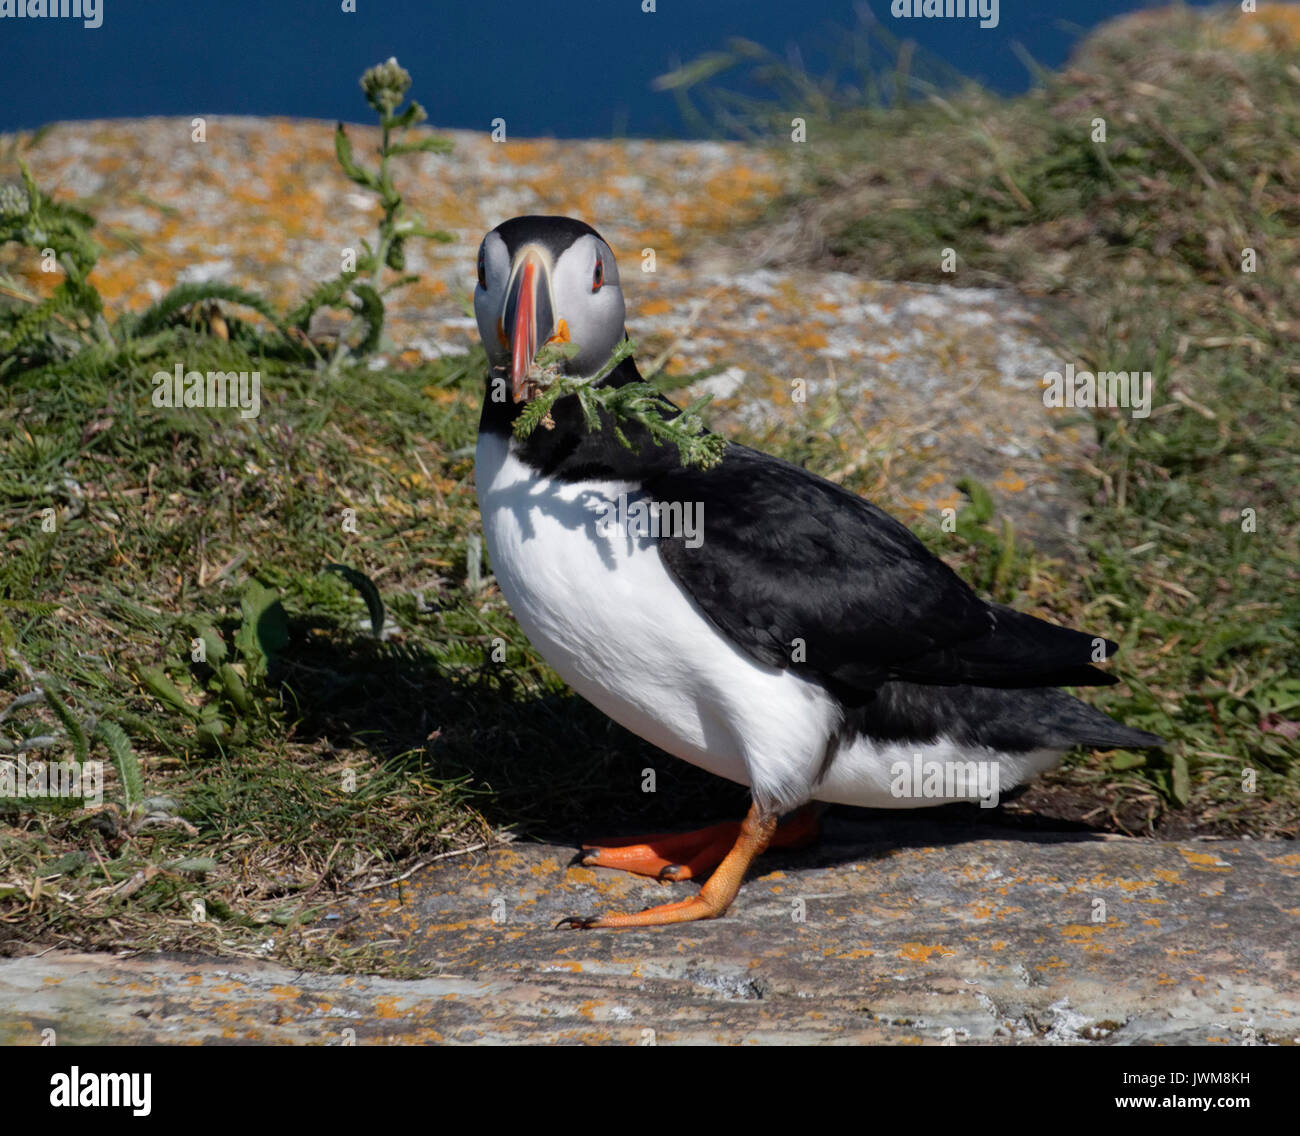 Newfoundland is one of the prime breeding grounds for Atlantic Puffin.  They are short, comical birds that live in tunnels along the cliffs. Stock Photo